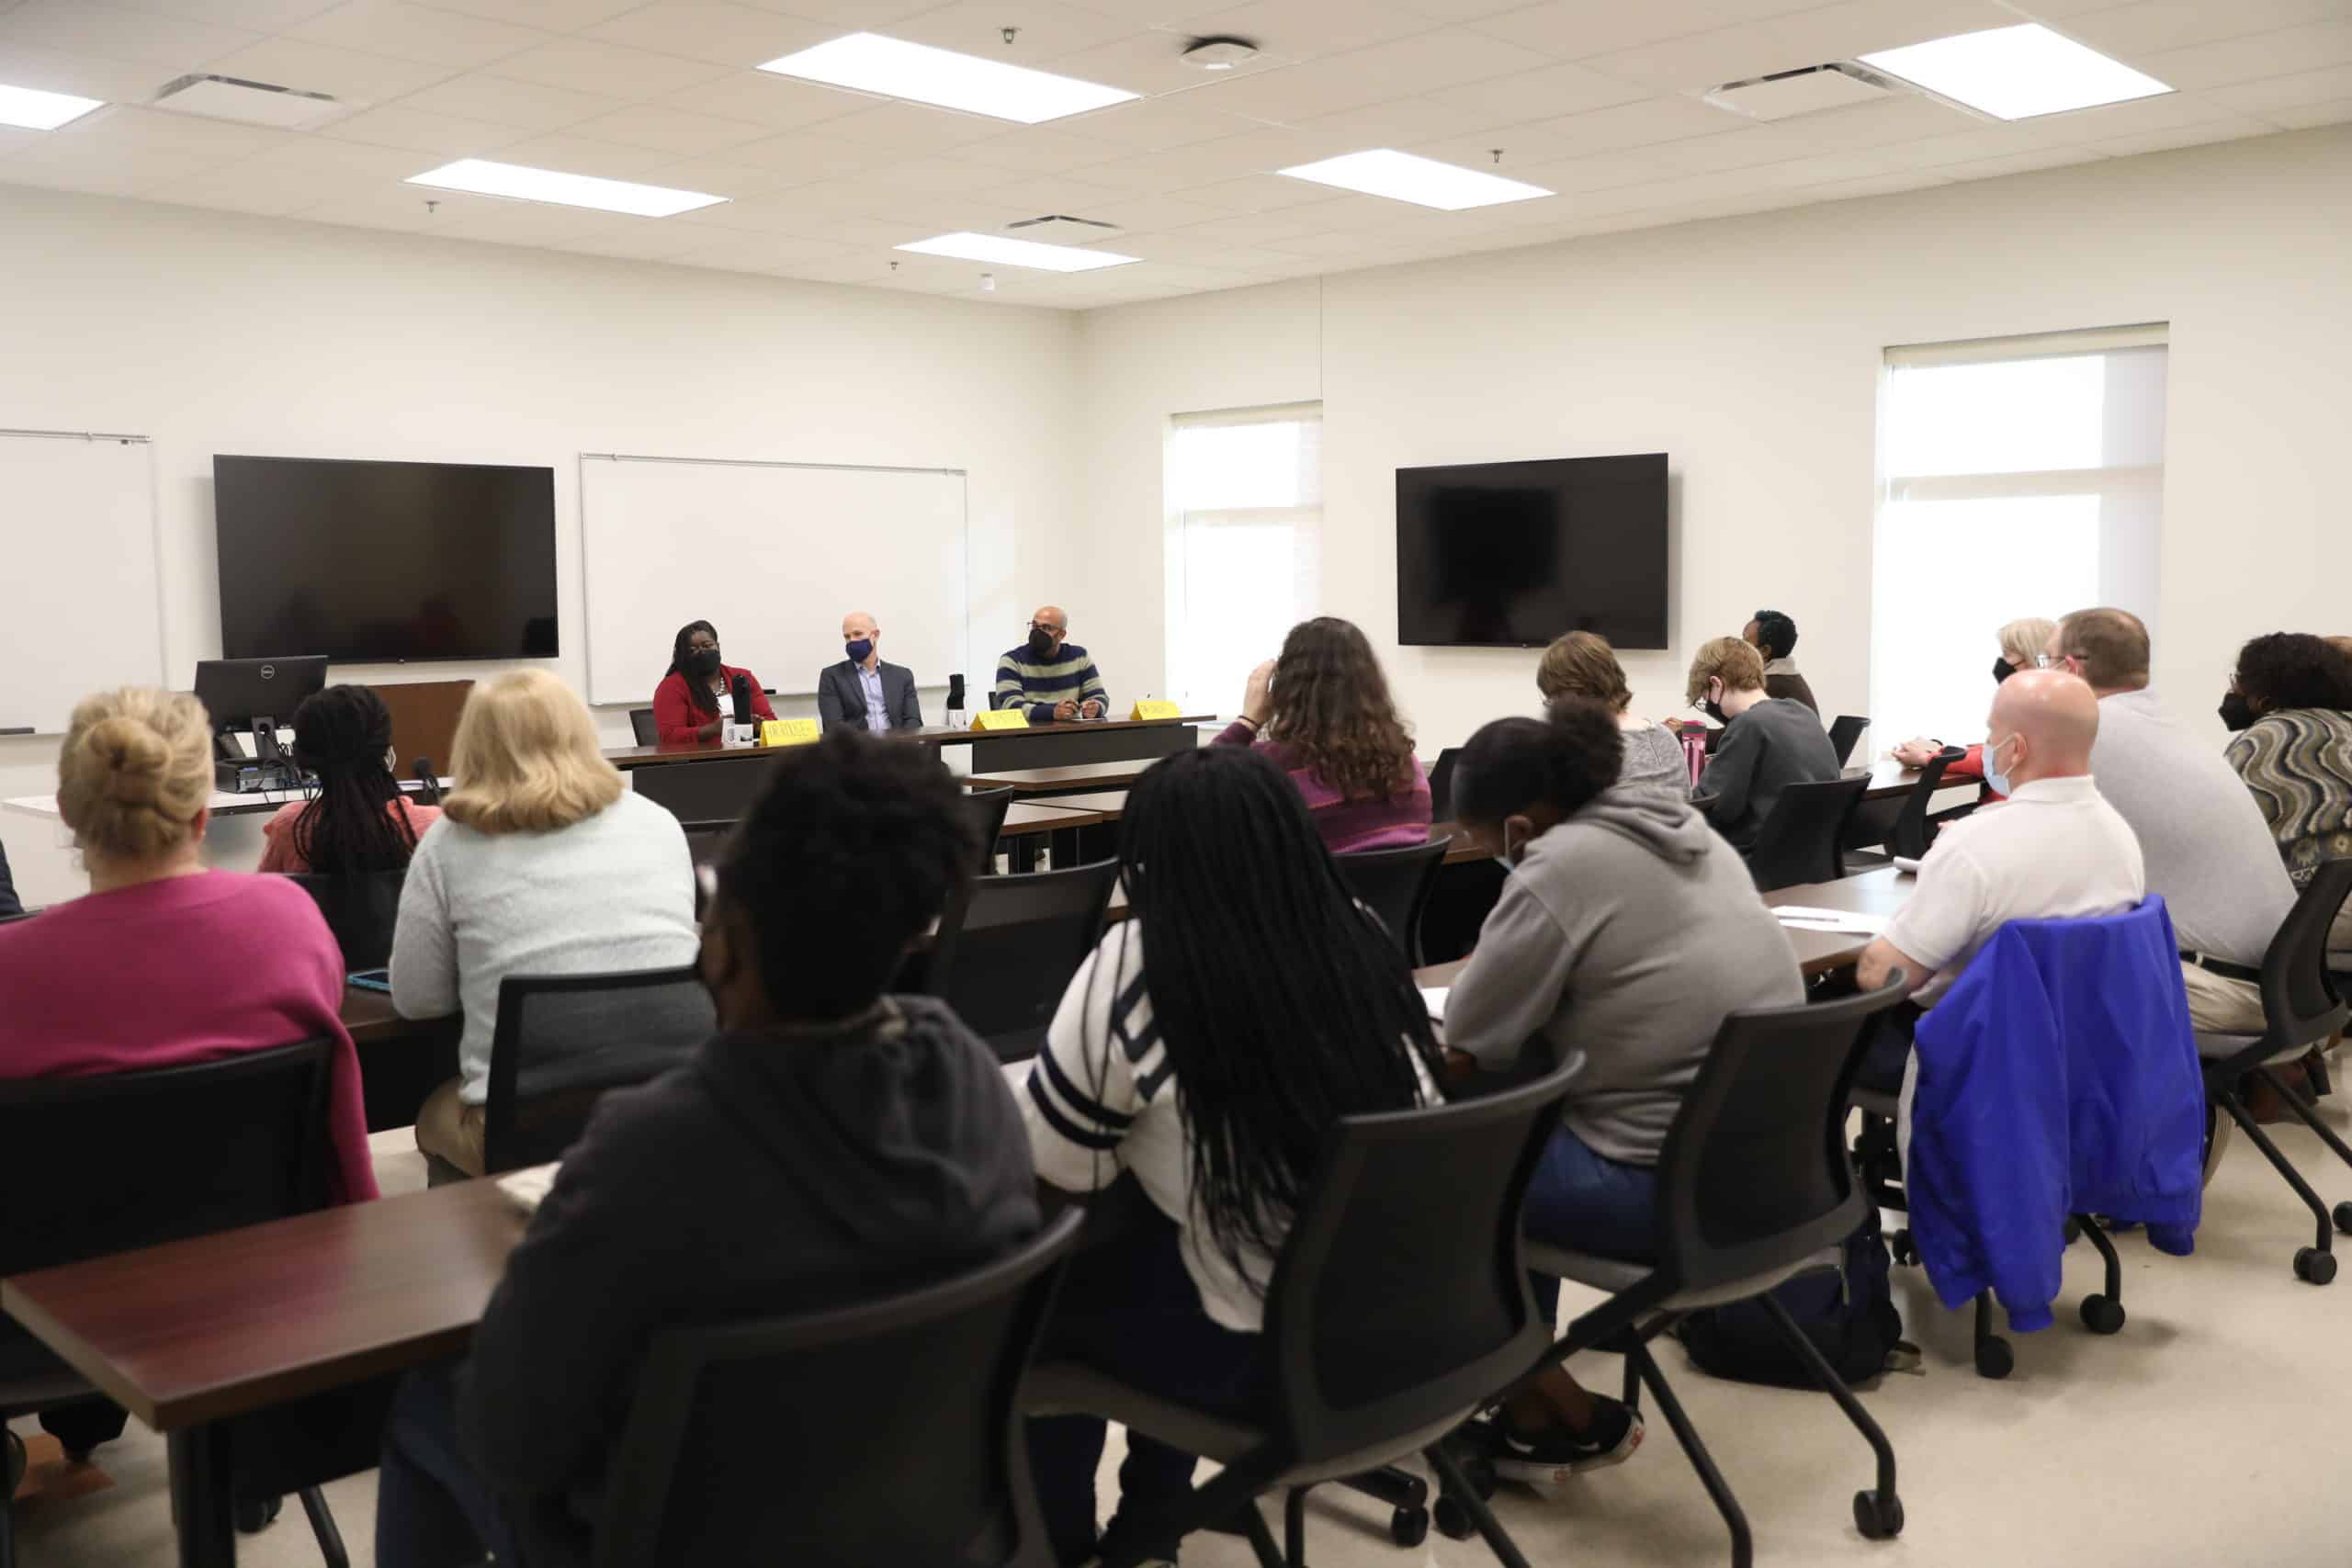 Students and faculty listen during a panel discussion.